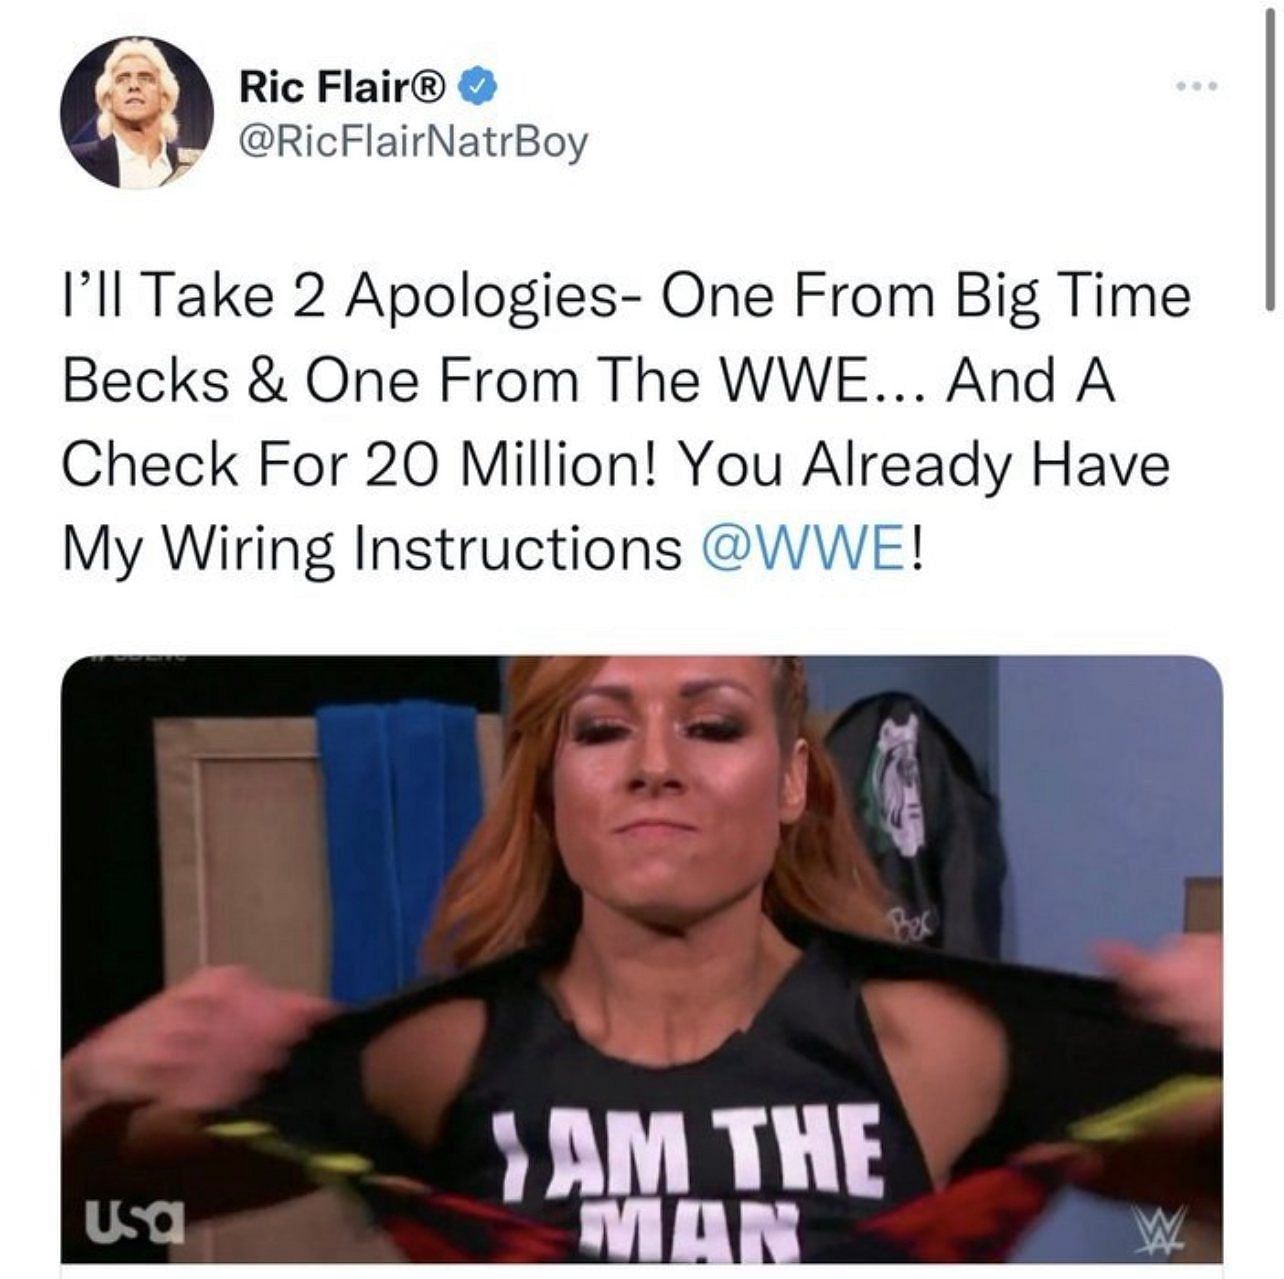 Ric Flair targetted WWE and Becky Lynch in the deleted tweet.